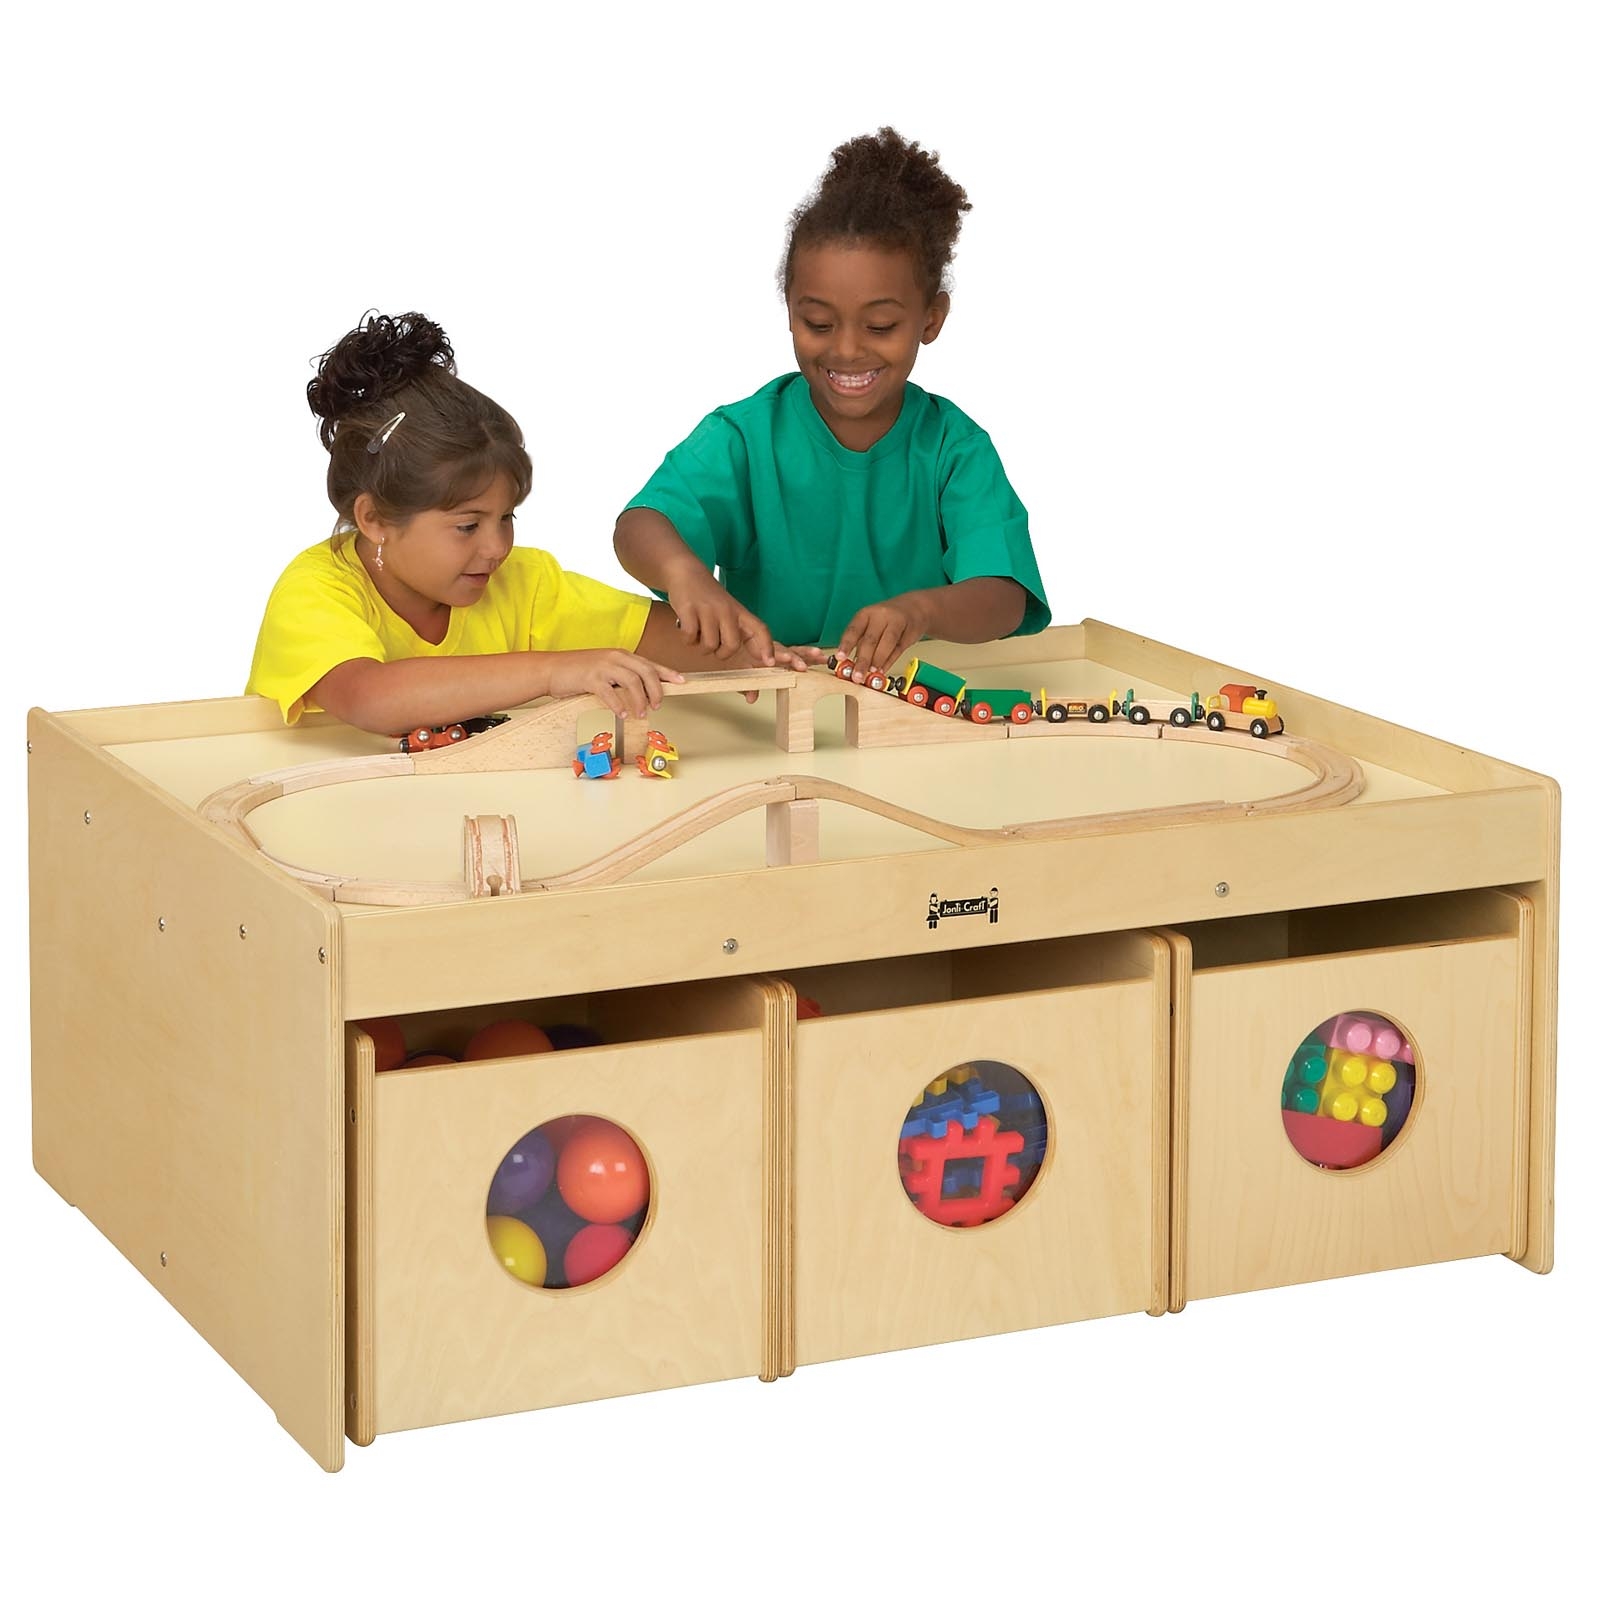 Kids activity play table storage for play areas free shipping